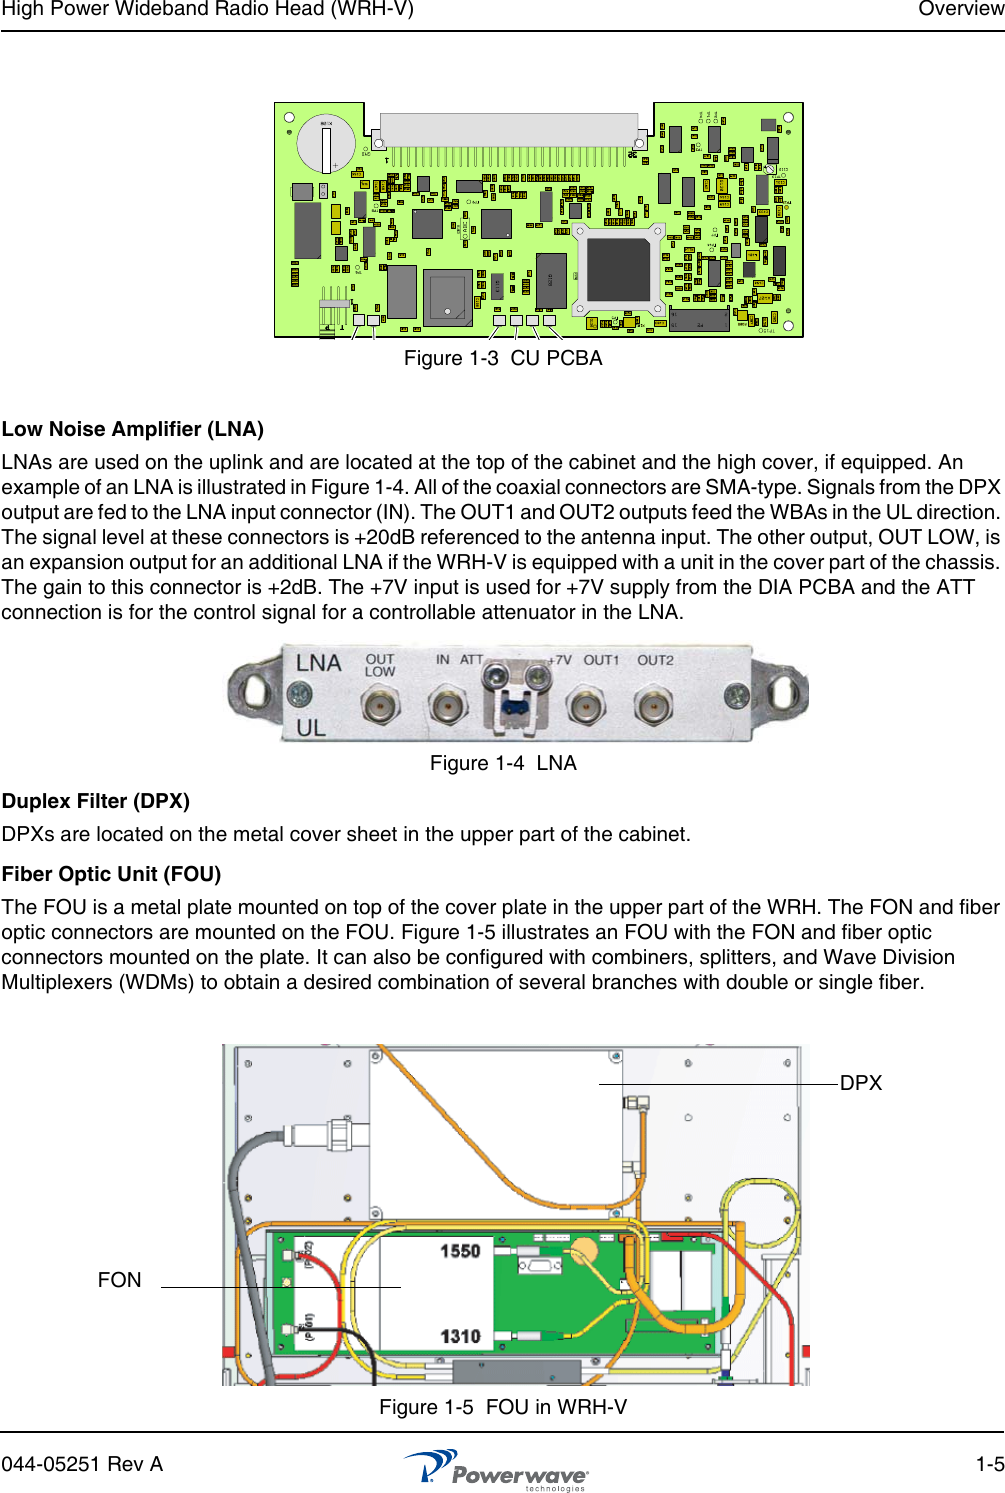 High Power Wideband Radio Head (WRH-V) Overview044-05251 Rev A 1-5Figure 1-3  CU PCBALow Noise Amplifier (LNA)LNAs are used on the uplink and are located at the top of the cabinet and the high cover, if equipped. An example of an LNA is illustrated in Figure 1-4. All of the coaxial connectors are SMA-type. Signals from the DPX output are fed to the LNA input connector (IN). The OUT1 and OUT2 outputs feed the WBAs in the UL direction. The signal level at these connectors is +20dB referenced to the antenna input. The other output, OUT LOW, is an expansion output for an additional LNA if the WRH-V is equipped with a unit in the cover part of the chassis. The gain to this connector is +2dB. The +7V input is used for +7V supply from the DIA PCBA and the ATT connection is for the control signal for a controllable attenuator in the LNA.Figure 1-4  LNADuplex Filter (DPX)DPXs are located on the metal cover sheet in the upper part of the cabinet.Fiber Optic Unit (FOU)The FOU is a metal plate mounted on top of the cover plate in the upper part of the WRH. The FON and fiber optic connectors are mounted on the FOU. Figure 1-5 illustrates an FOU with the FON and fiber optic connectors mounted on the plate. It can also be configured with combiners, splitters, and Wave Division Multiplexers (WDMs) to obtain a desired combination of several branches with double or single fiber.Figure 1-5  FOU in WRH-VFONDPX